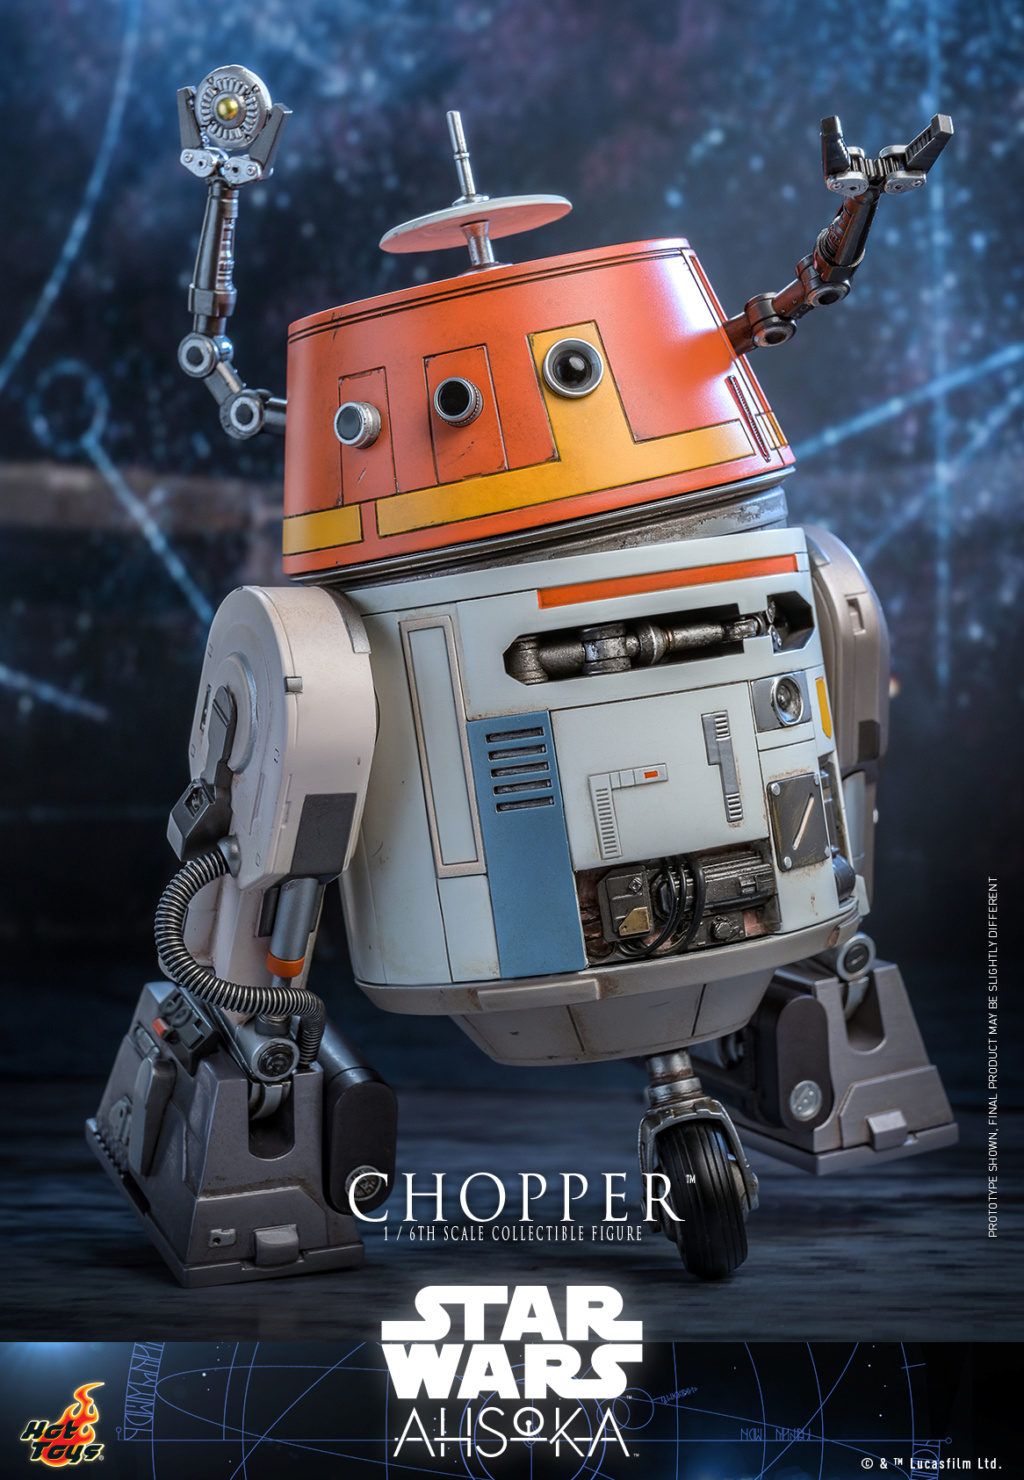 HotToys - NEW PRODUCT: HOT TOYS: STAR WARS: AHSOKA™ CHOPPER™ 1/6TH SCALE COLLECTIBLE FIGURE 12100